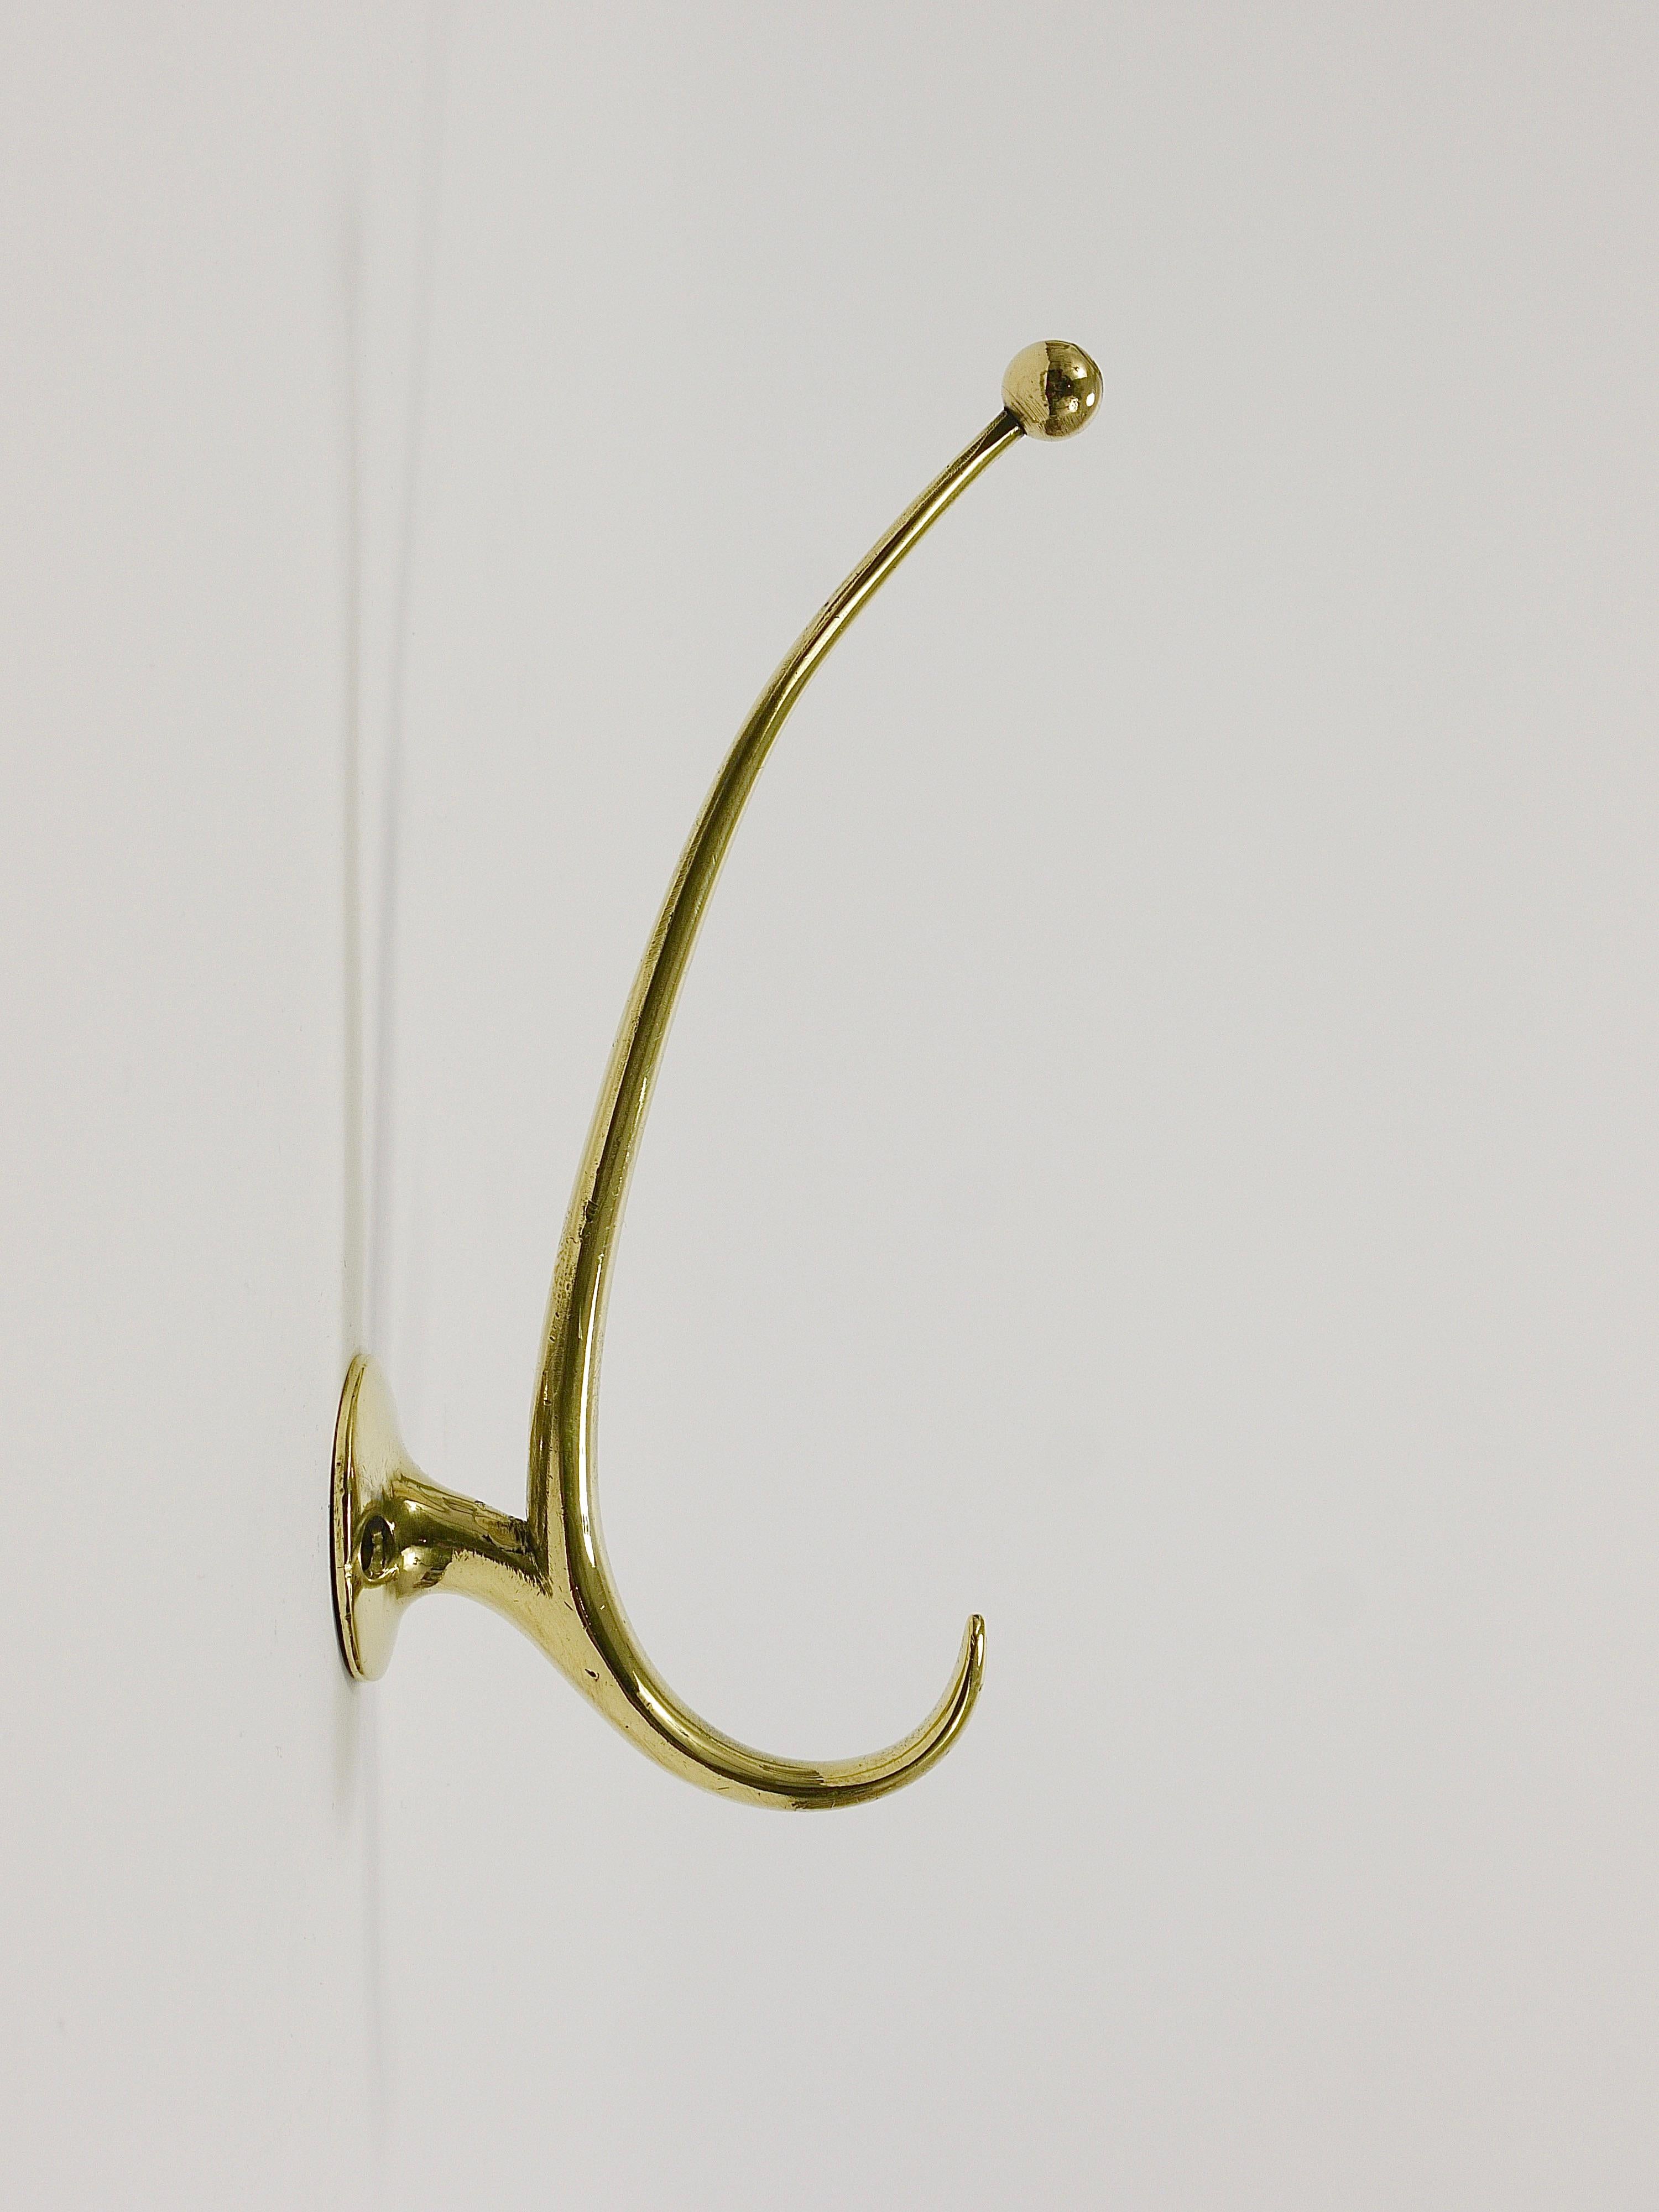 A collection of up to six vintage sleek and elegant Mid-Century wall coat hooks, designed by Franz Hagenauer and crafted by Werkstätte Hagenauer in the early 1950s. Sold individually and priced per piece. These hooks are handcrafted from solid